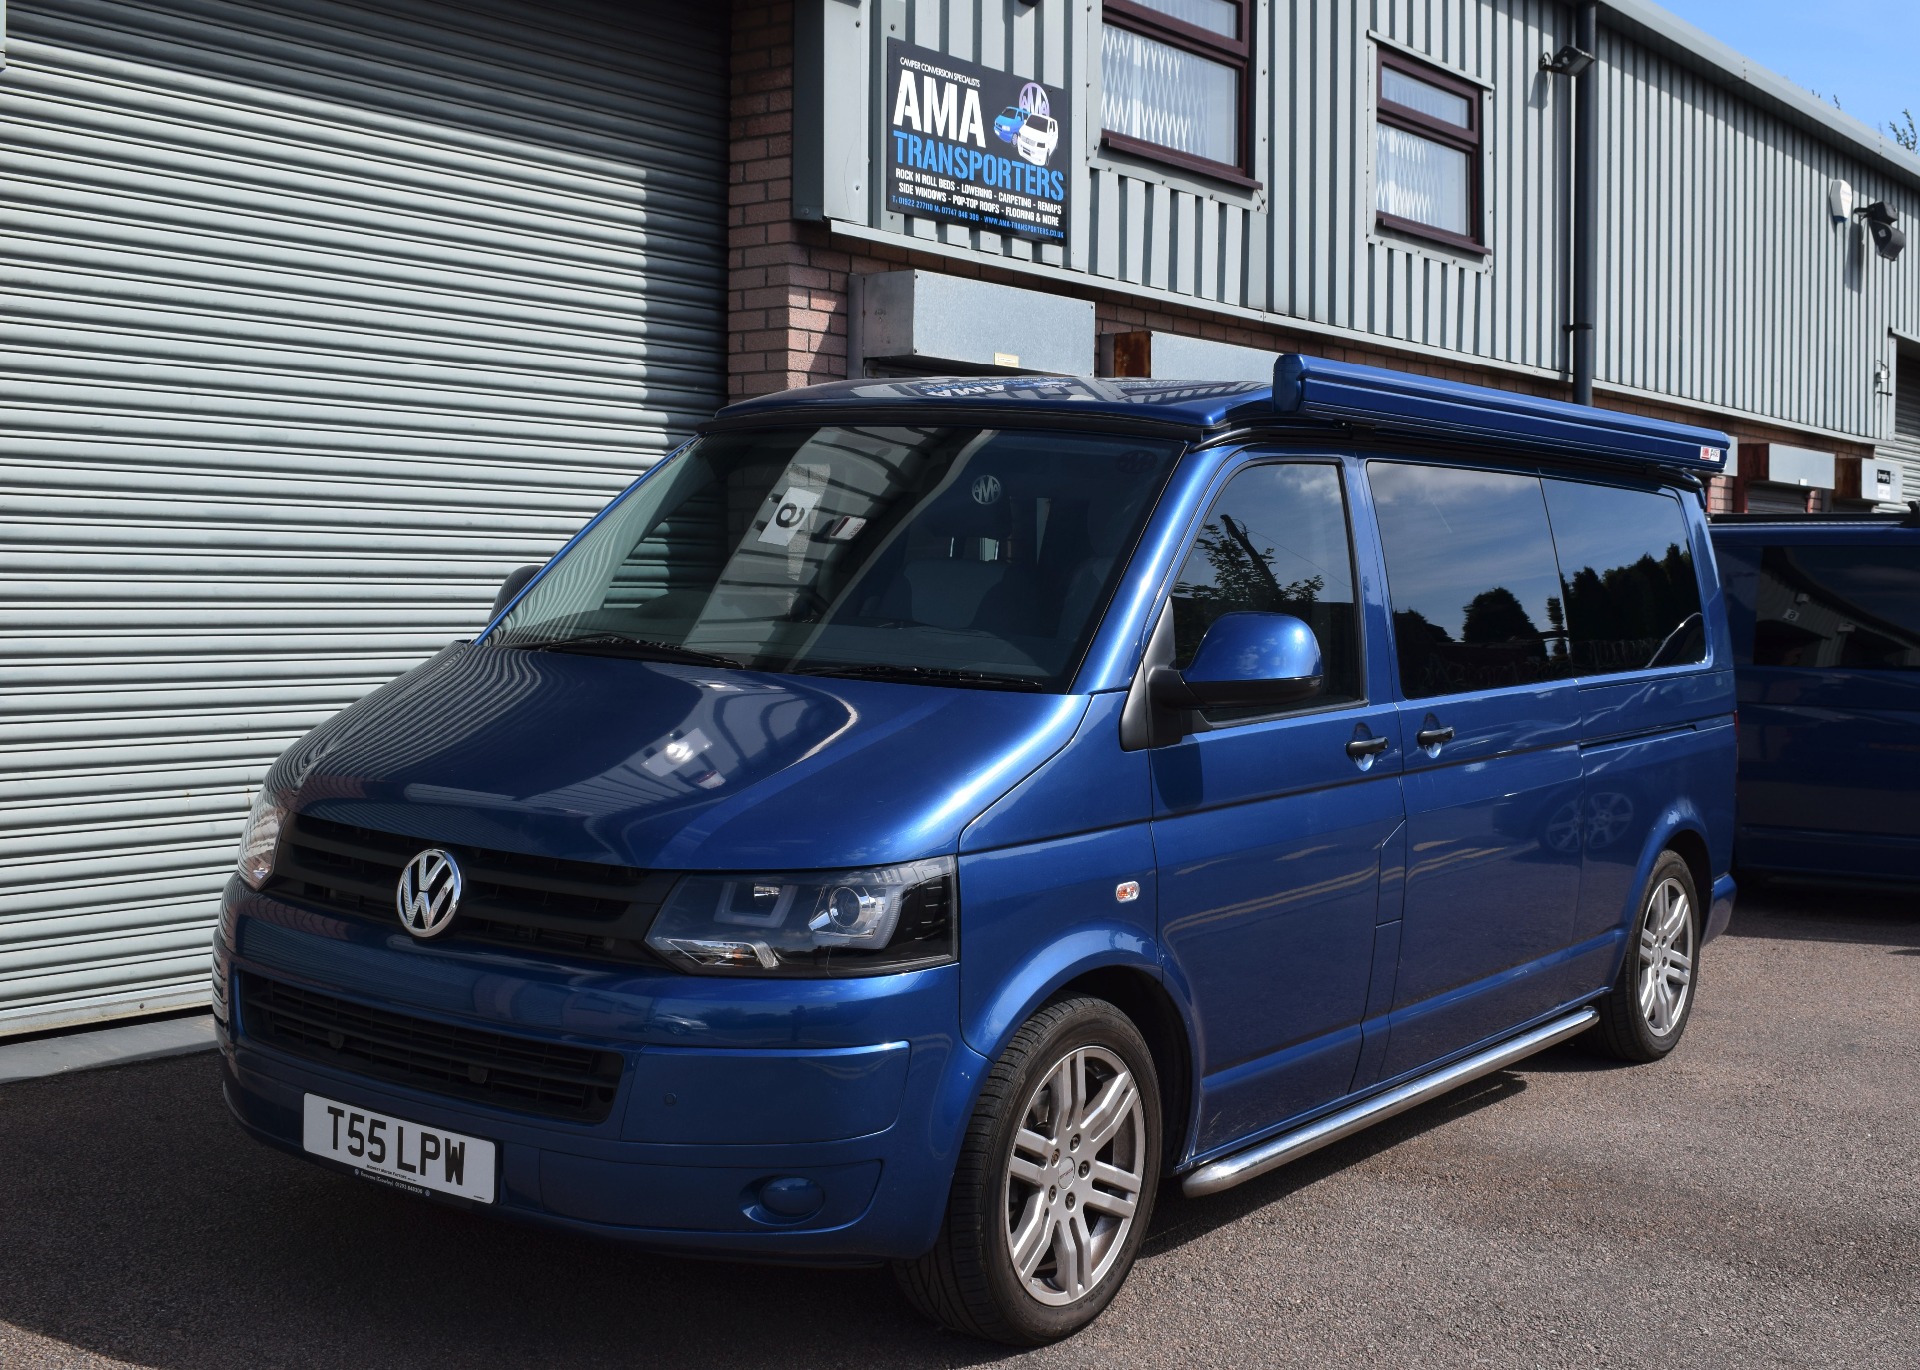 The LWB DSG T5 was ideal for the Tourer Trio Conversion